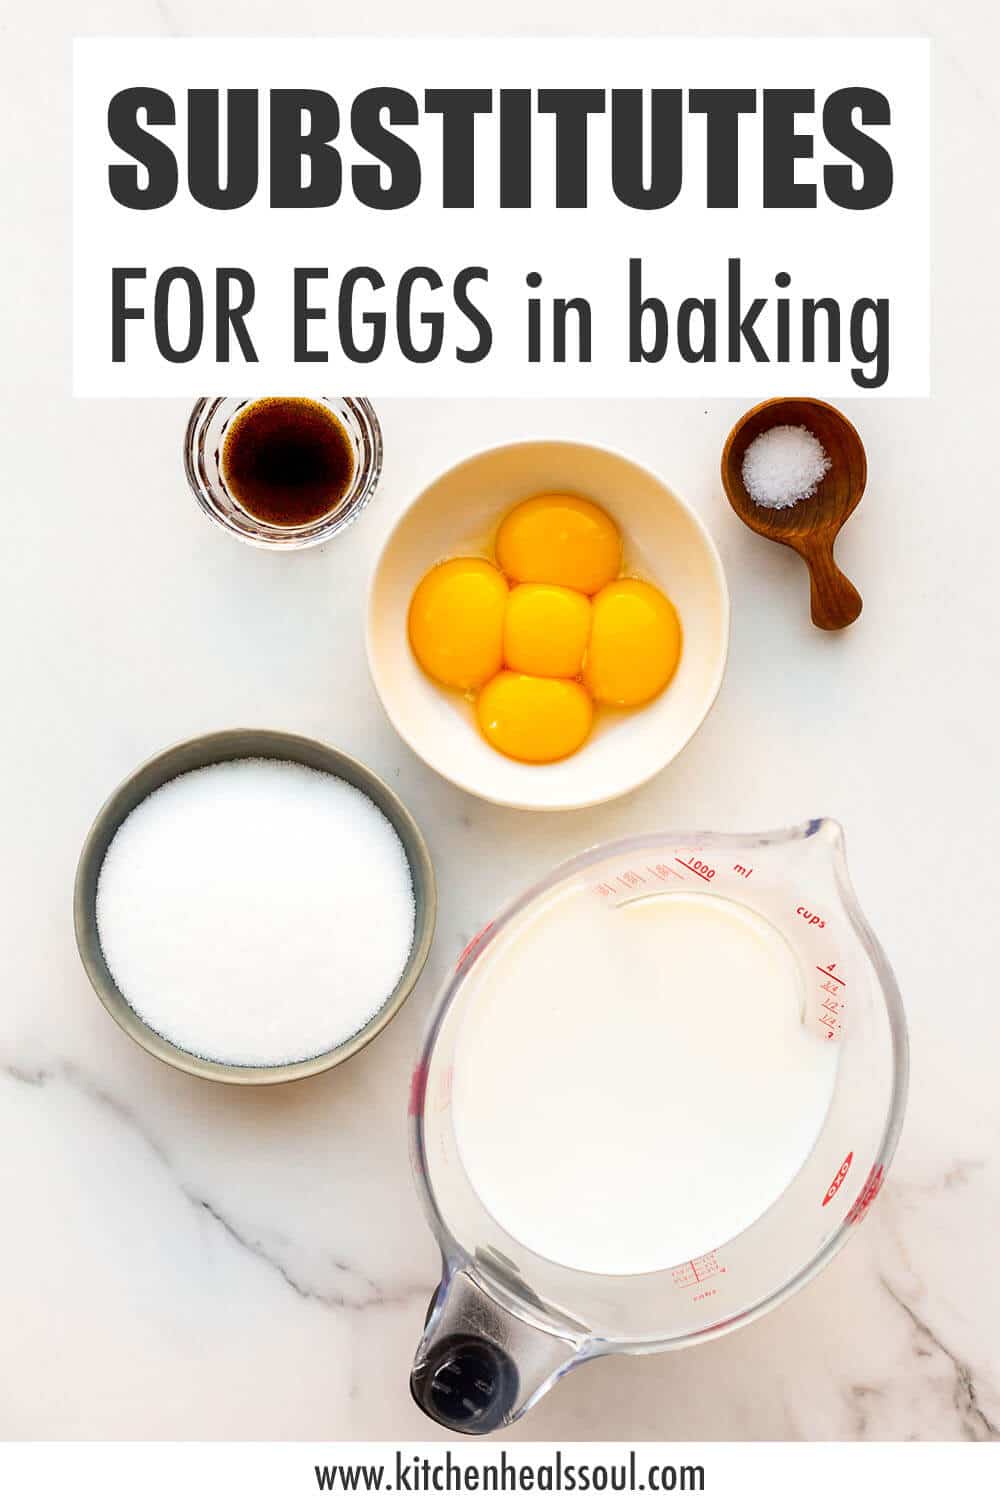 Ingredients measured out, including egg yolks, to illustrate substitutes for eggs in baking.